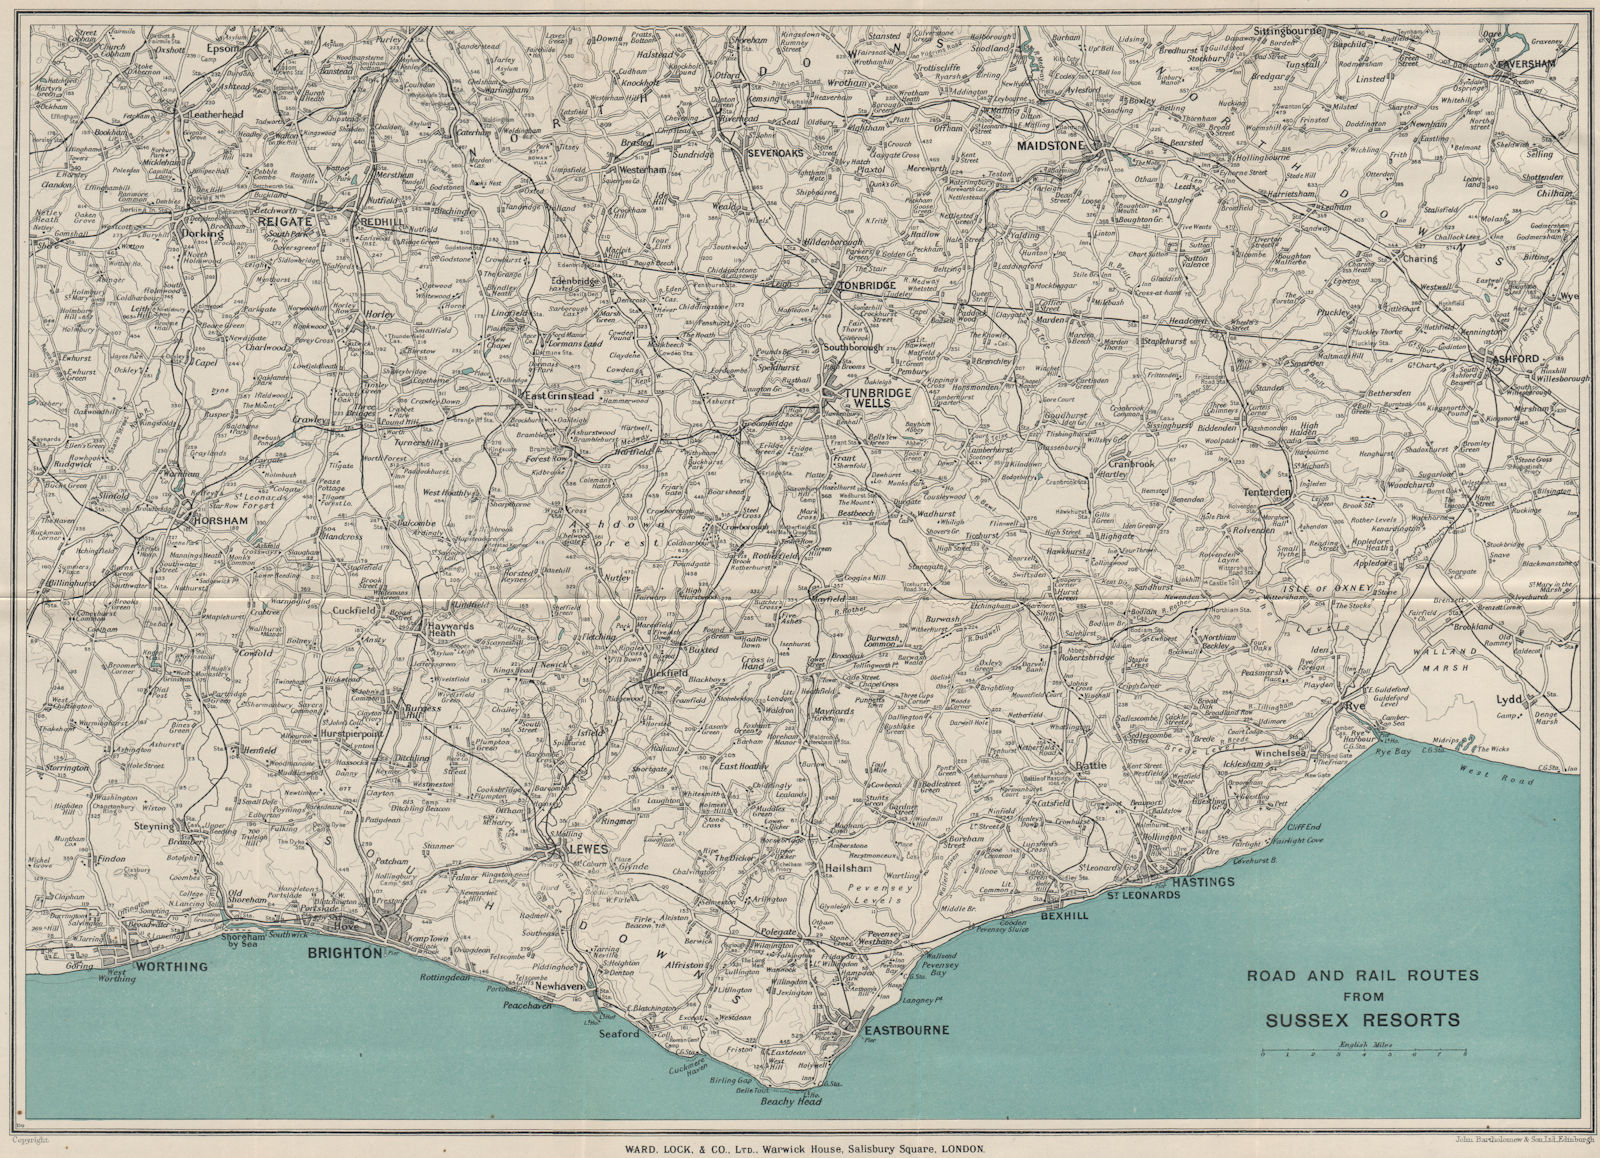 E. SUSSEX/SOUTH DOWNS. Tunbridge Wells Eastbourne Brighton Hastings Rye 1933 map